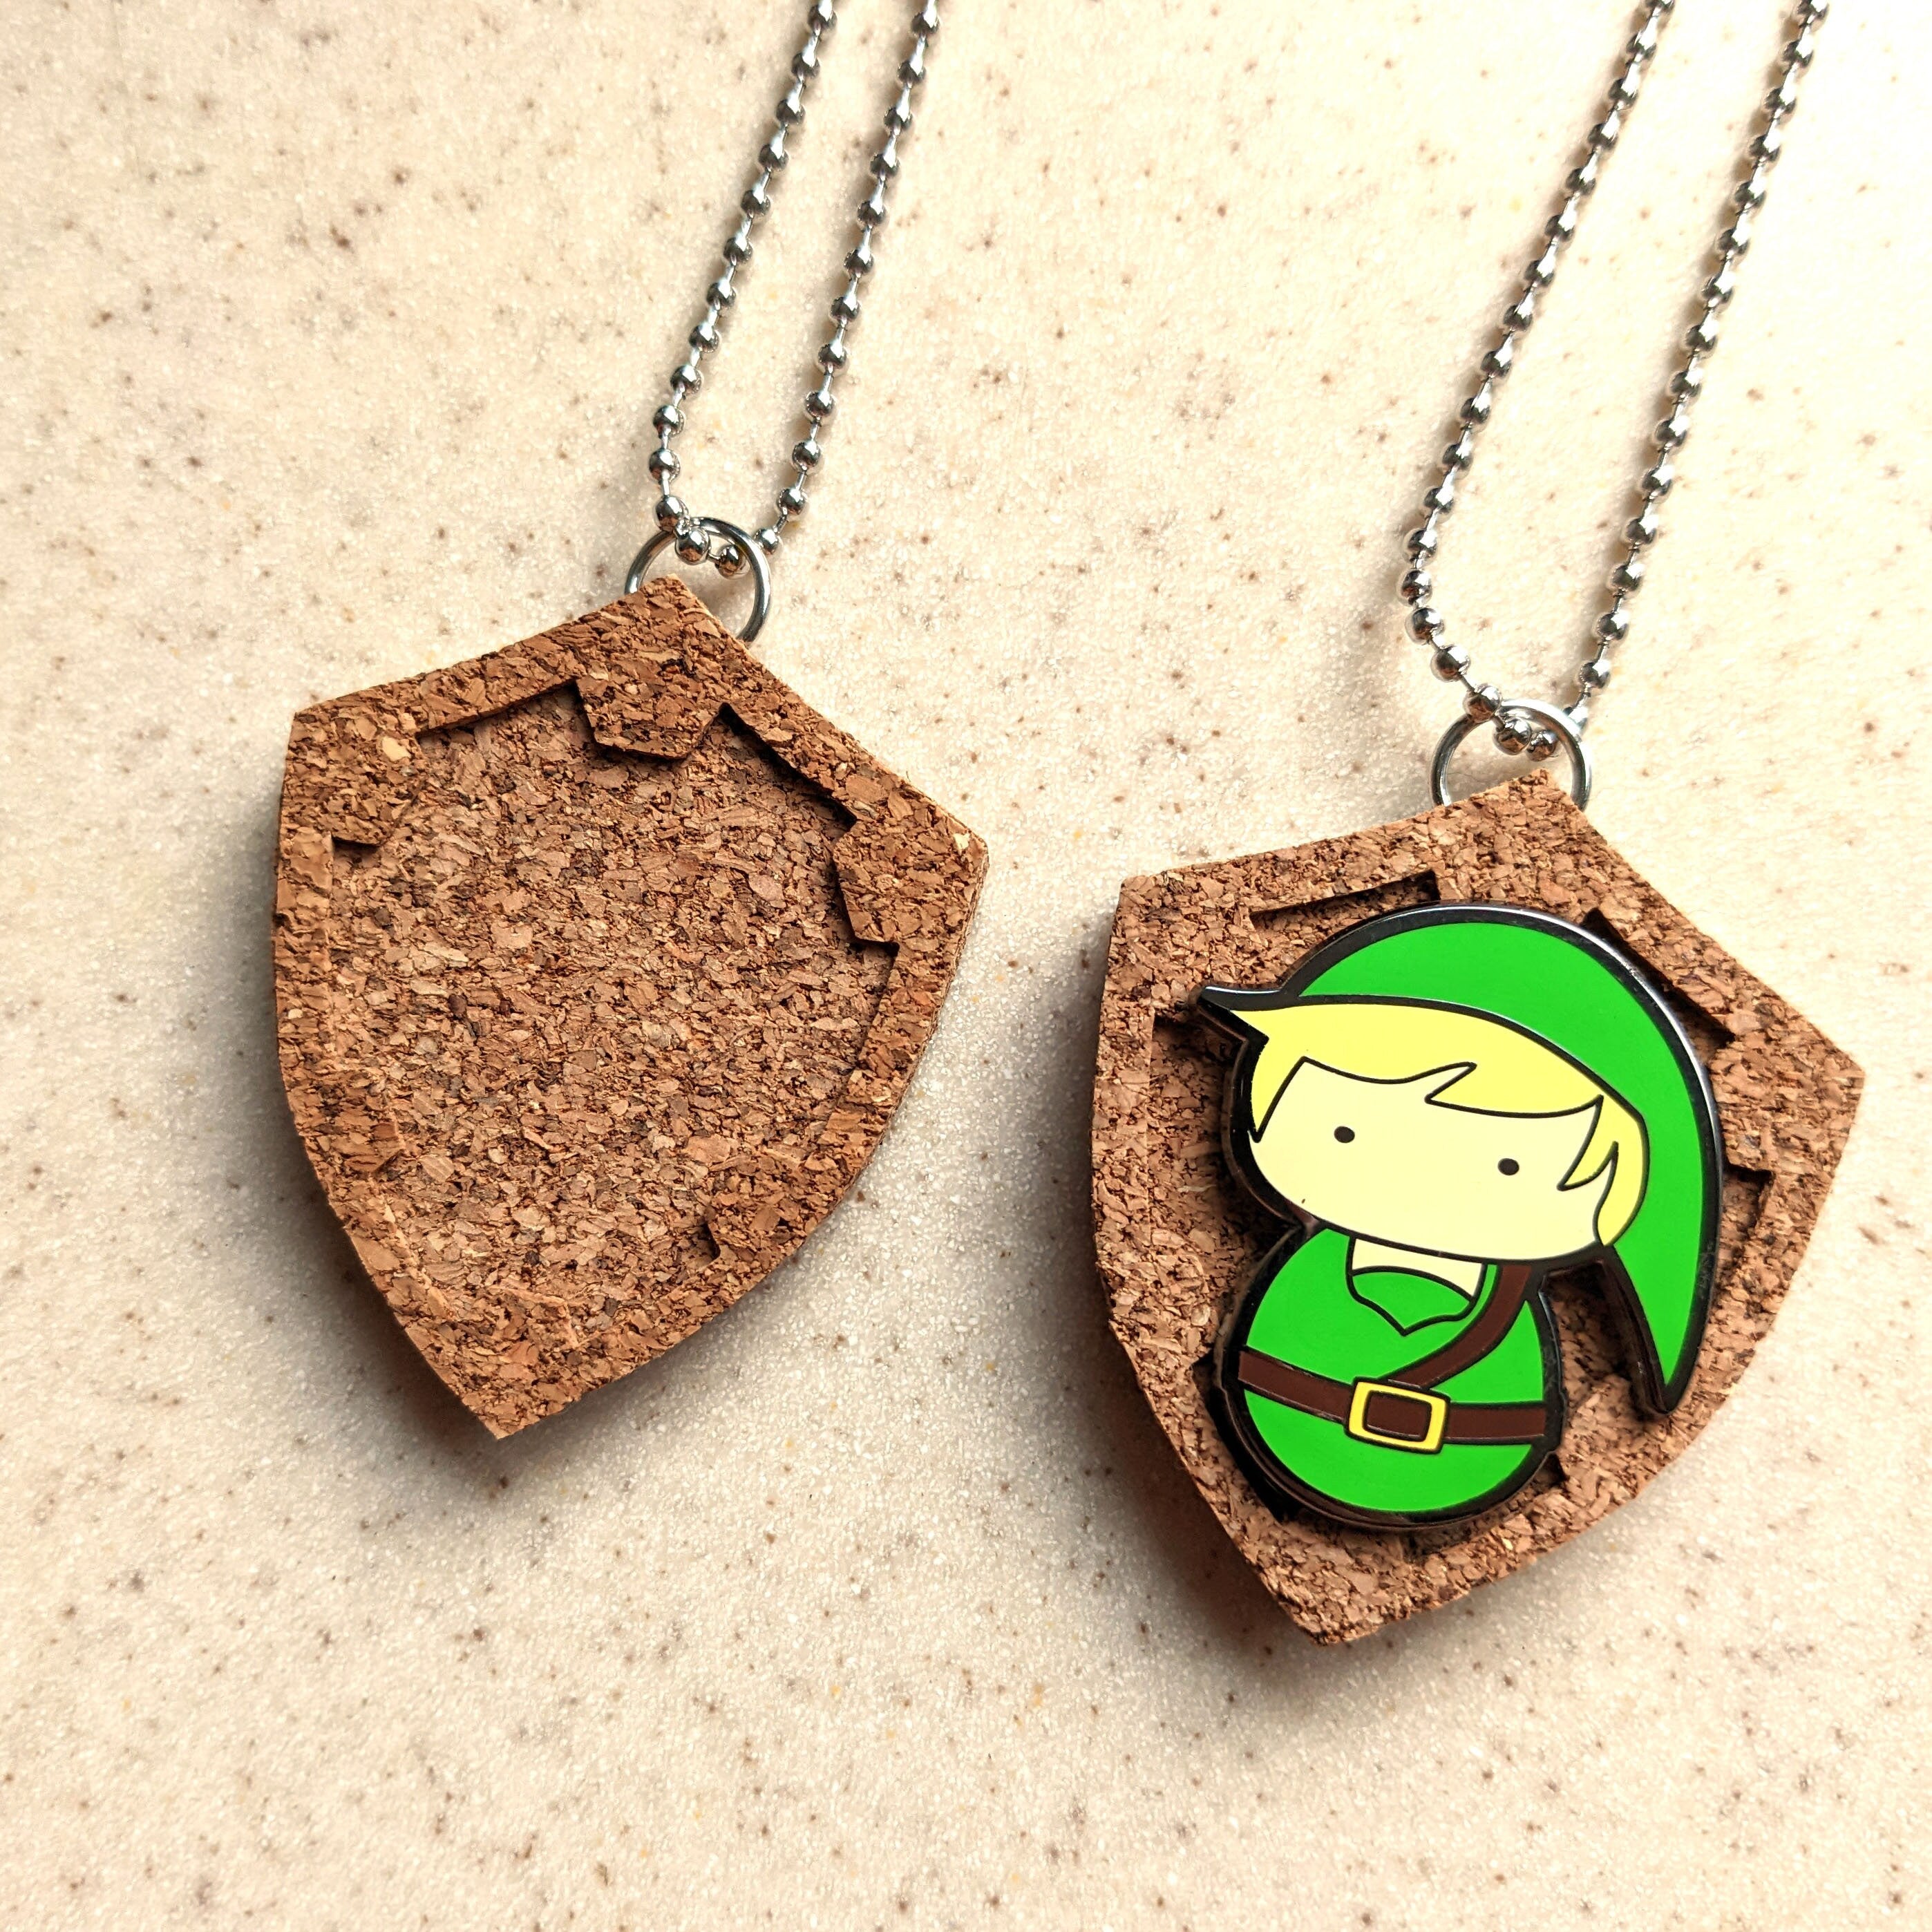 Link Shield Corkboard Enamel Pin 2" Pendant Display with ball Chain Necklace or Keychain